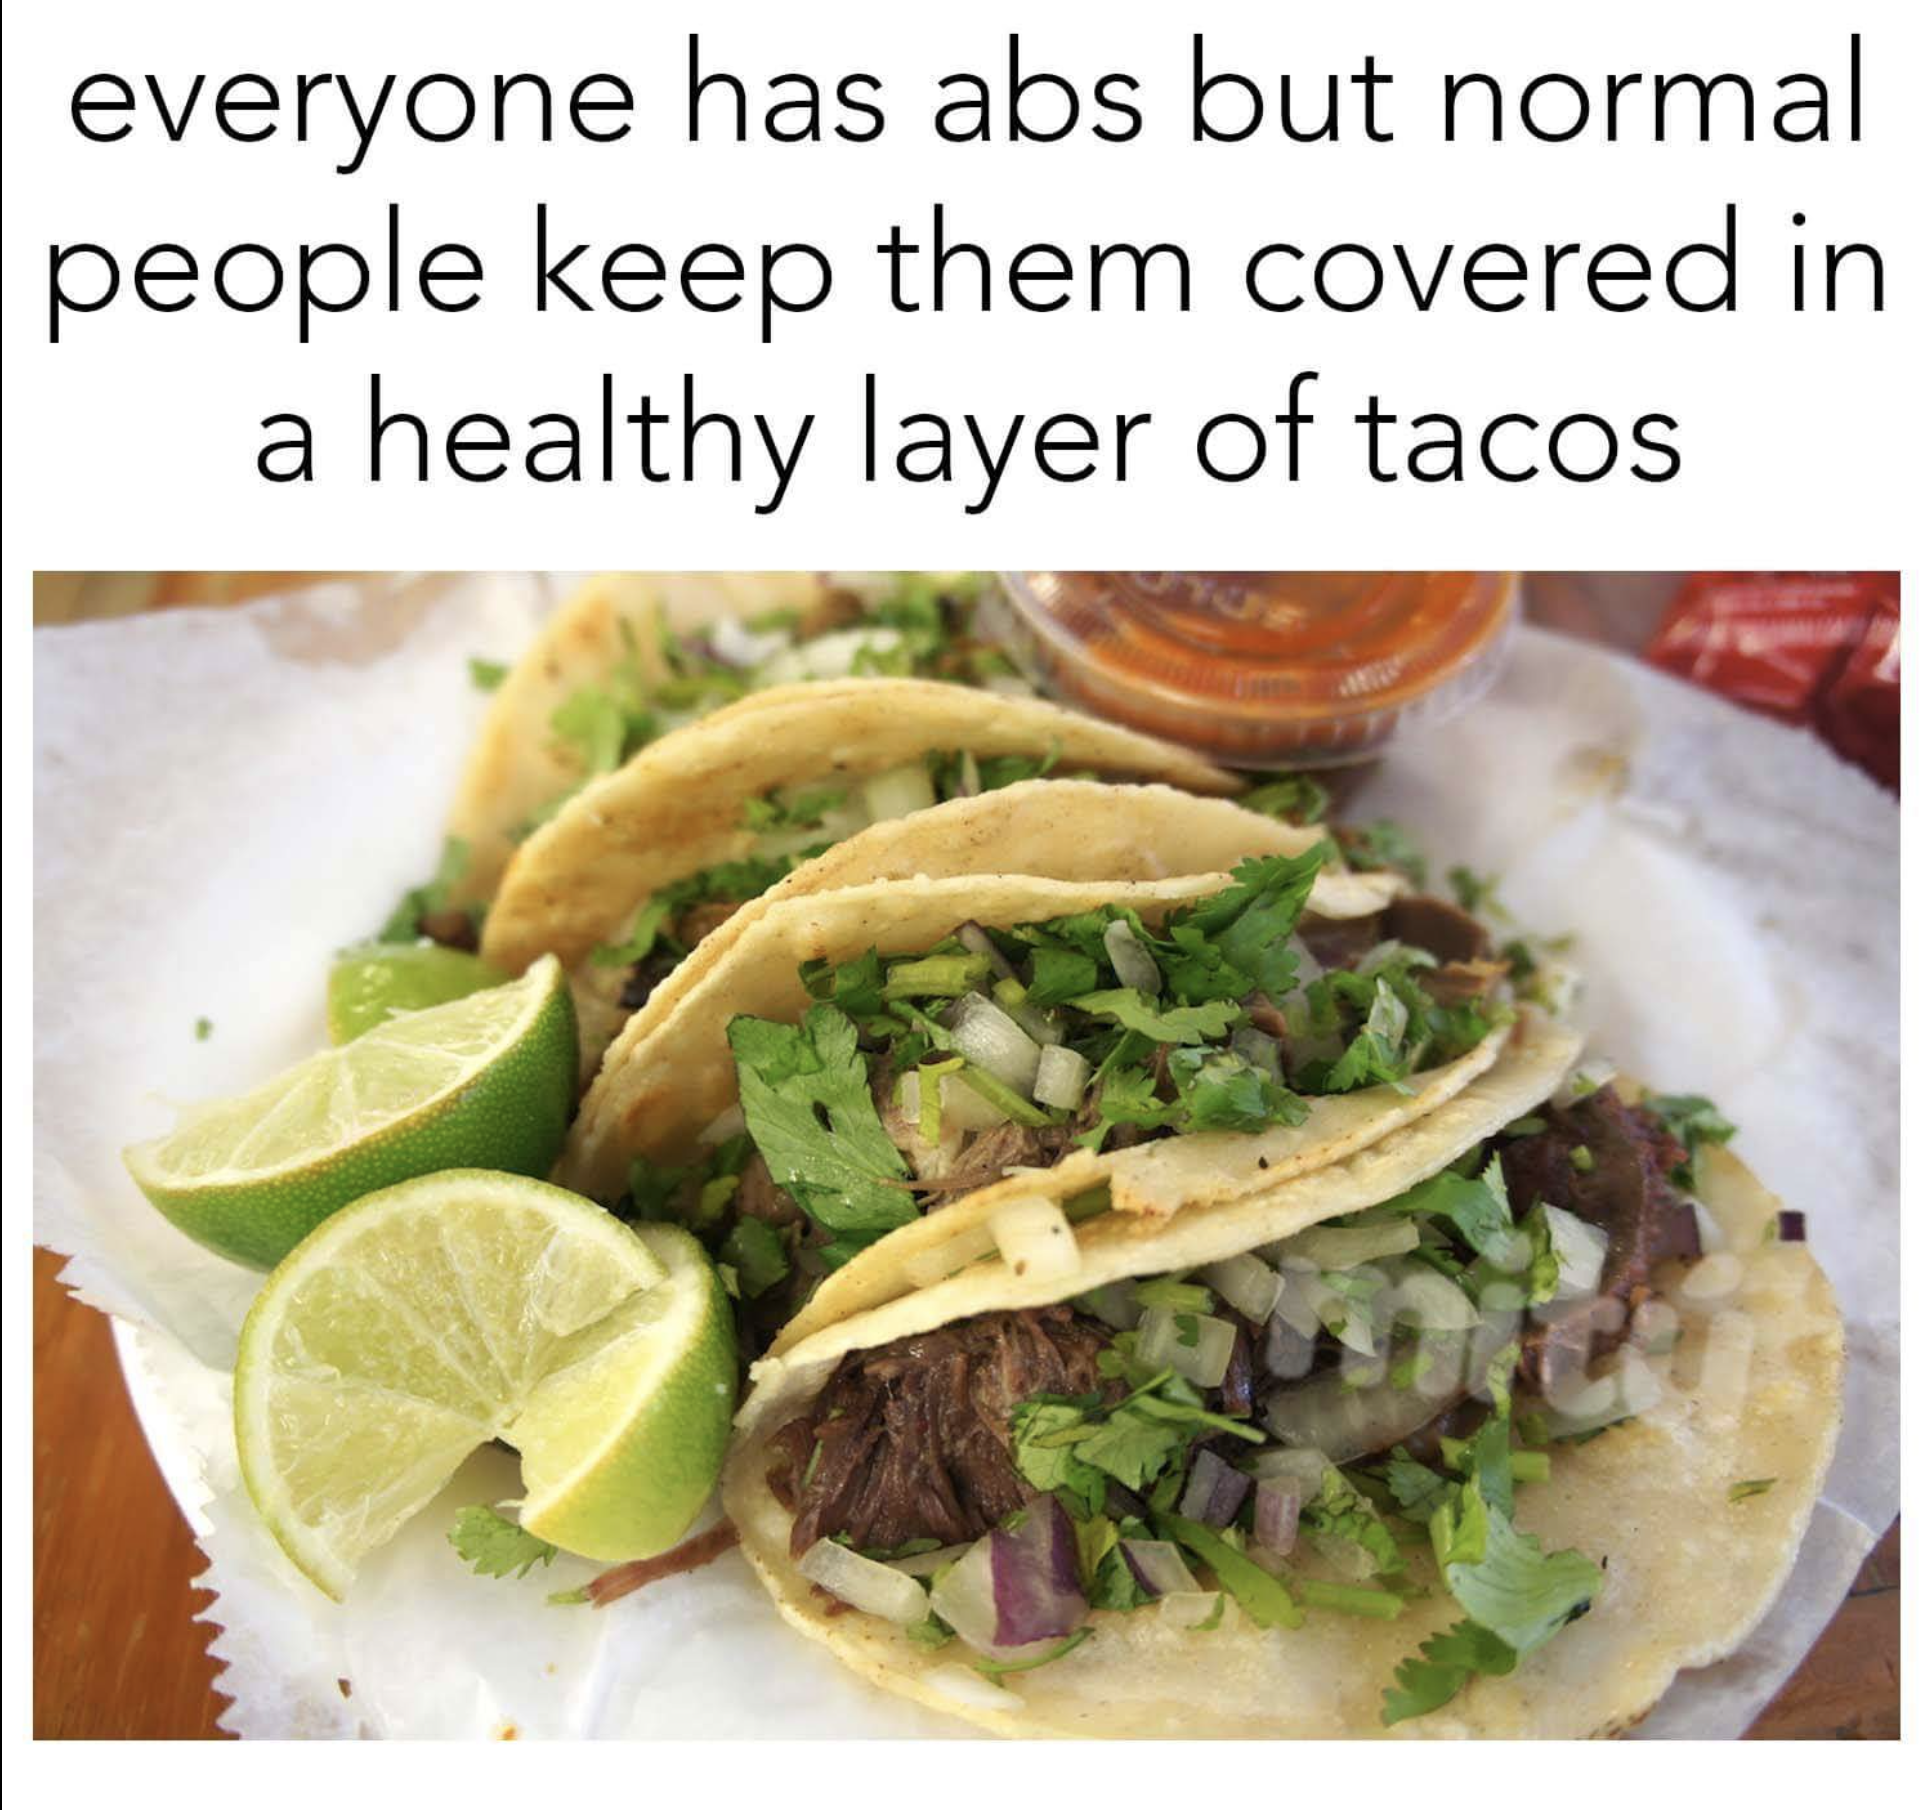 monday morning randomness - mexican taco vs american taco - everyone has abs but normal people keep them covered in a healthy layer of tacos